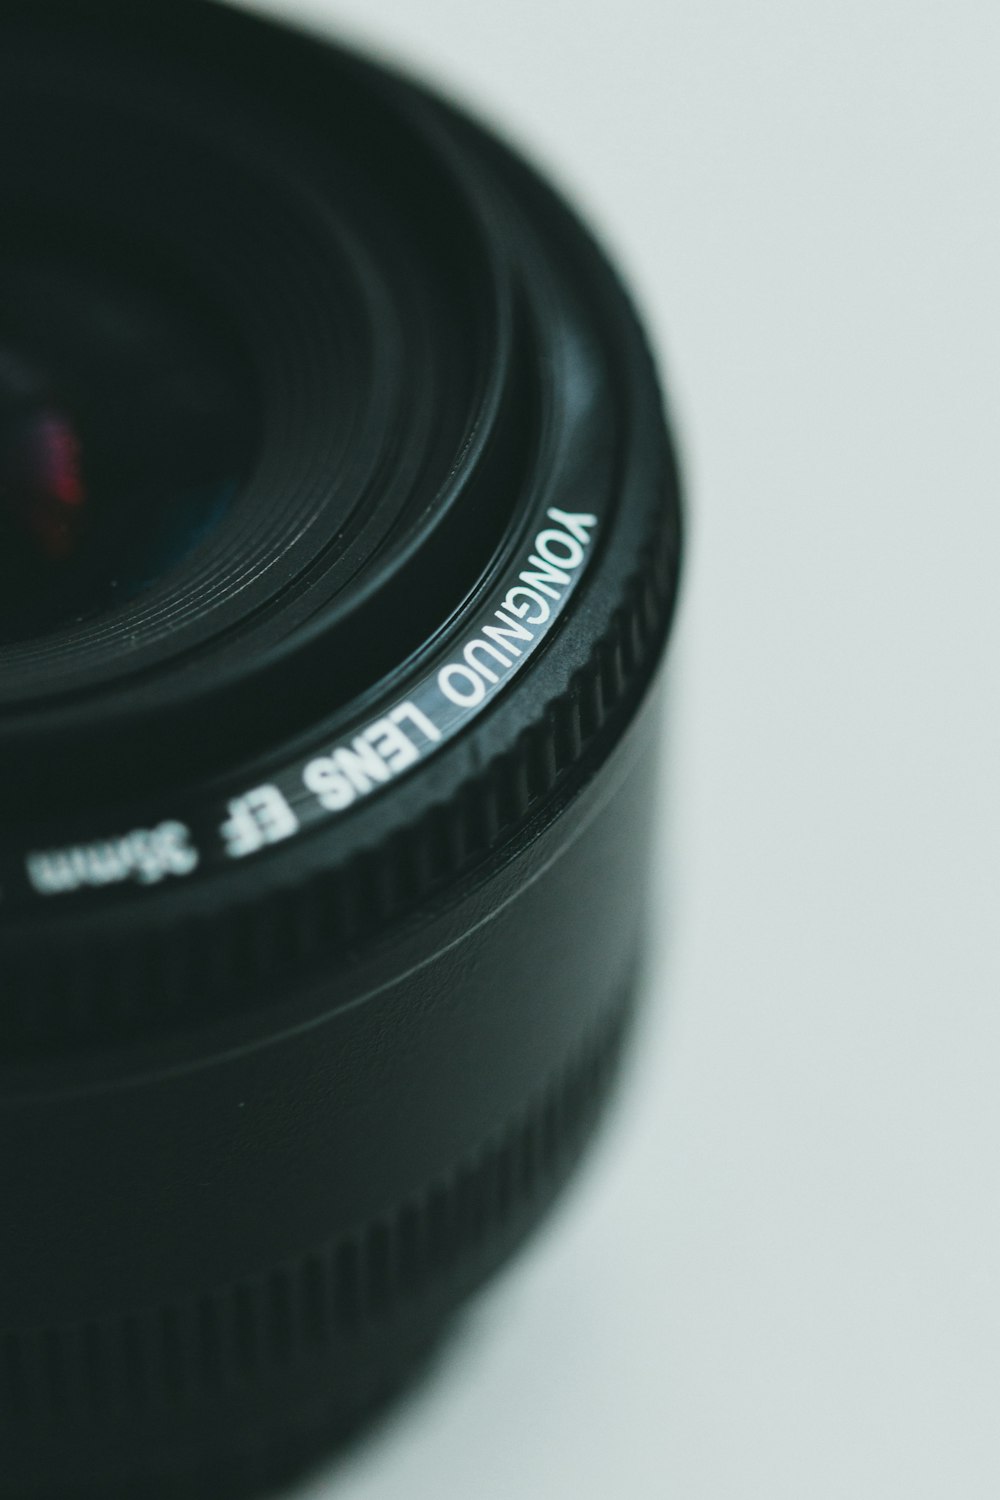 a close up of a camera lens on a white surface